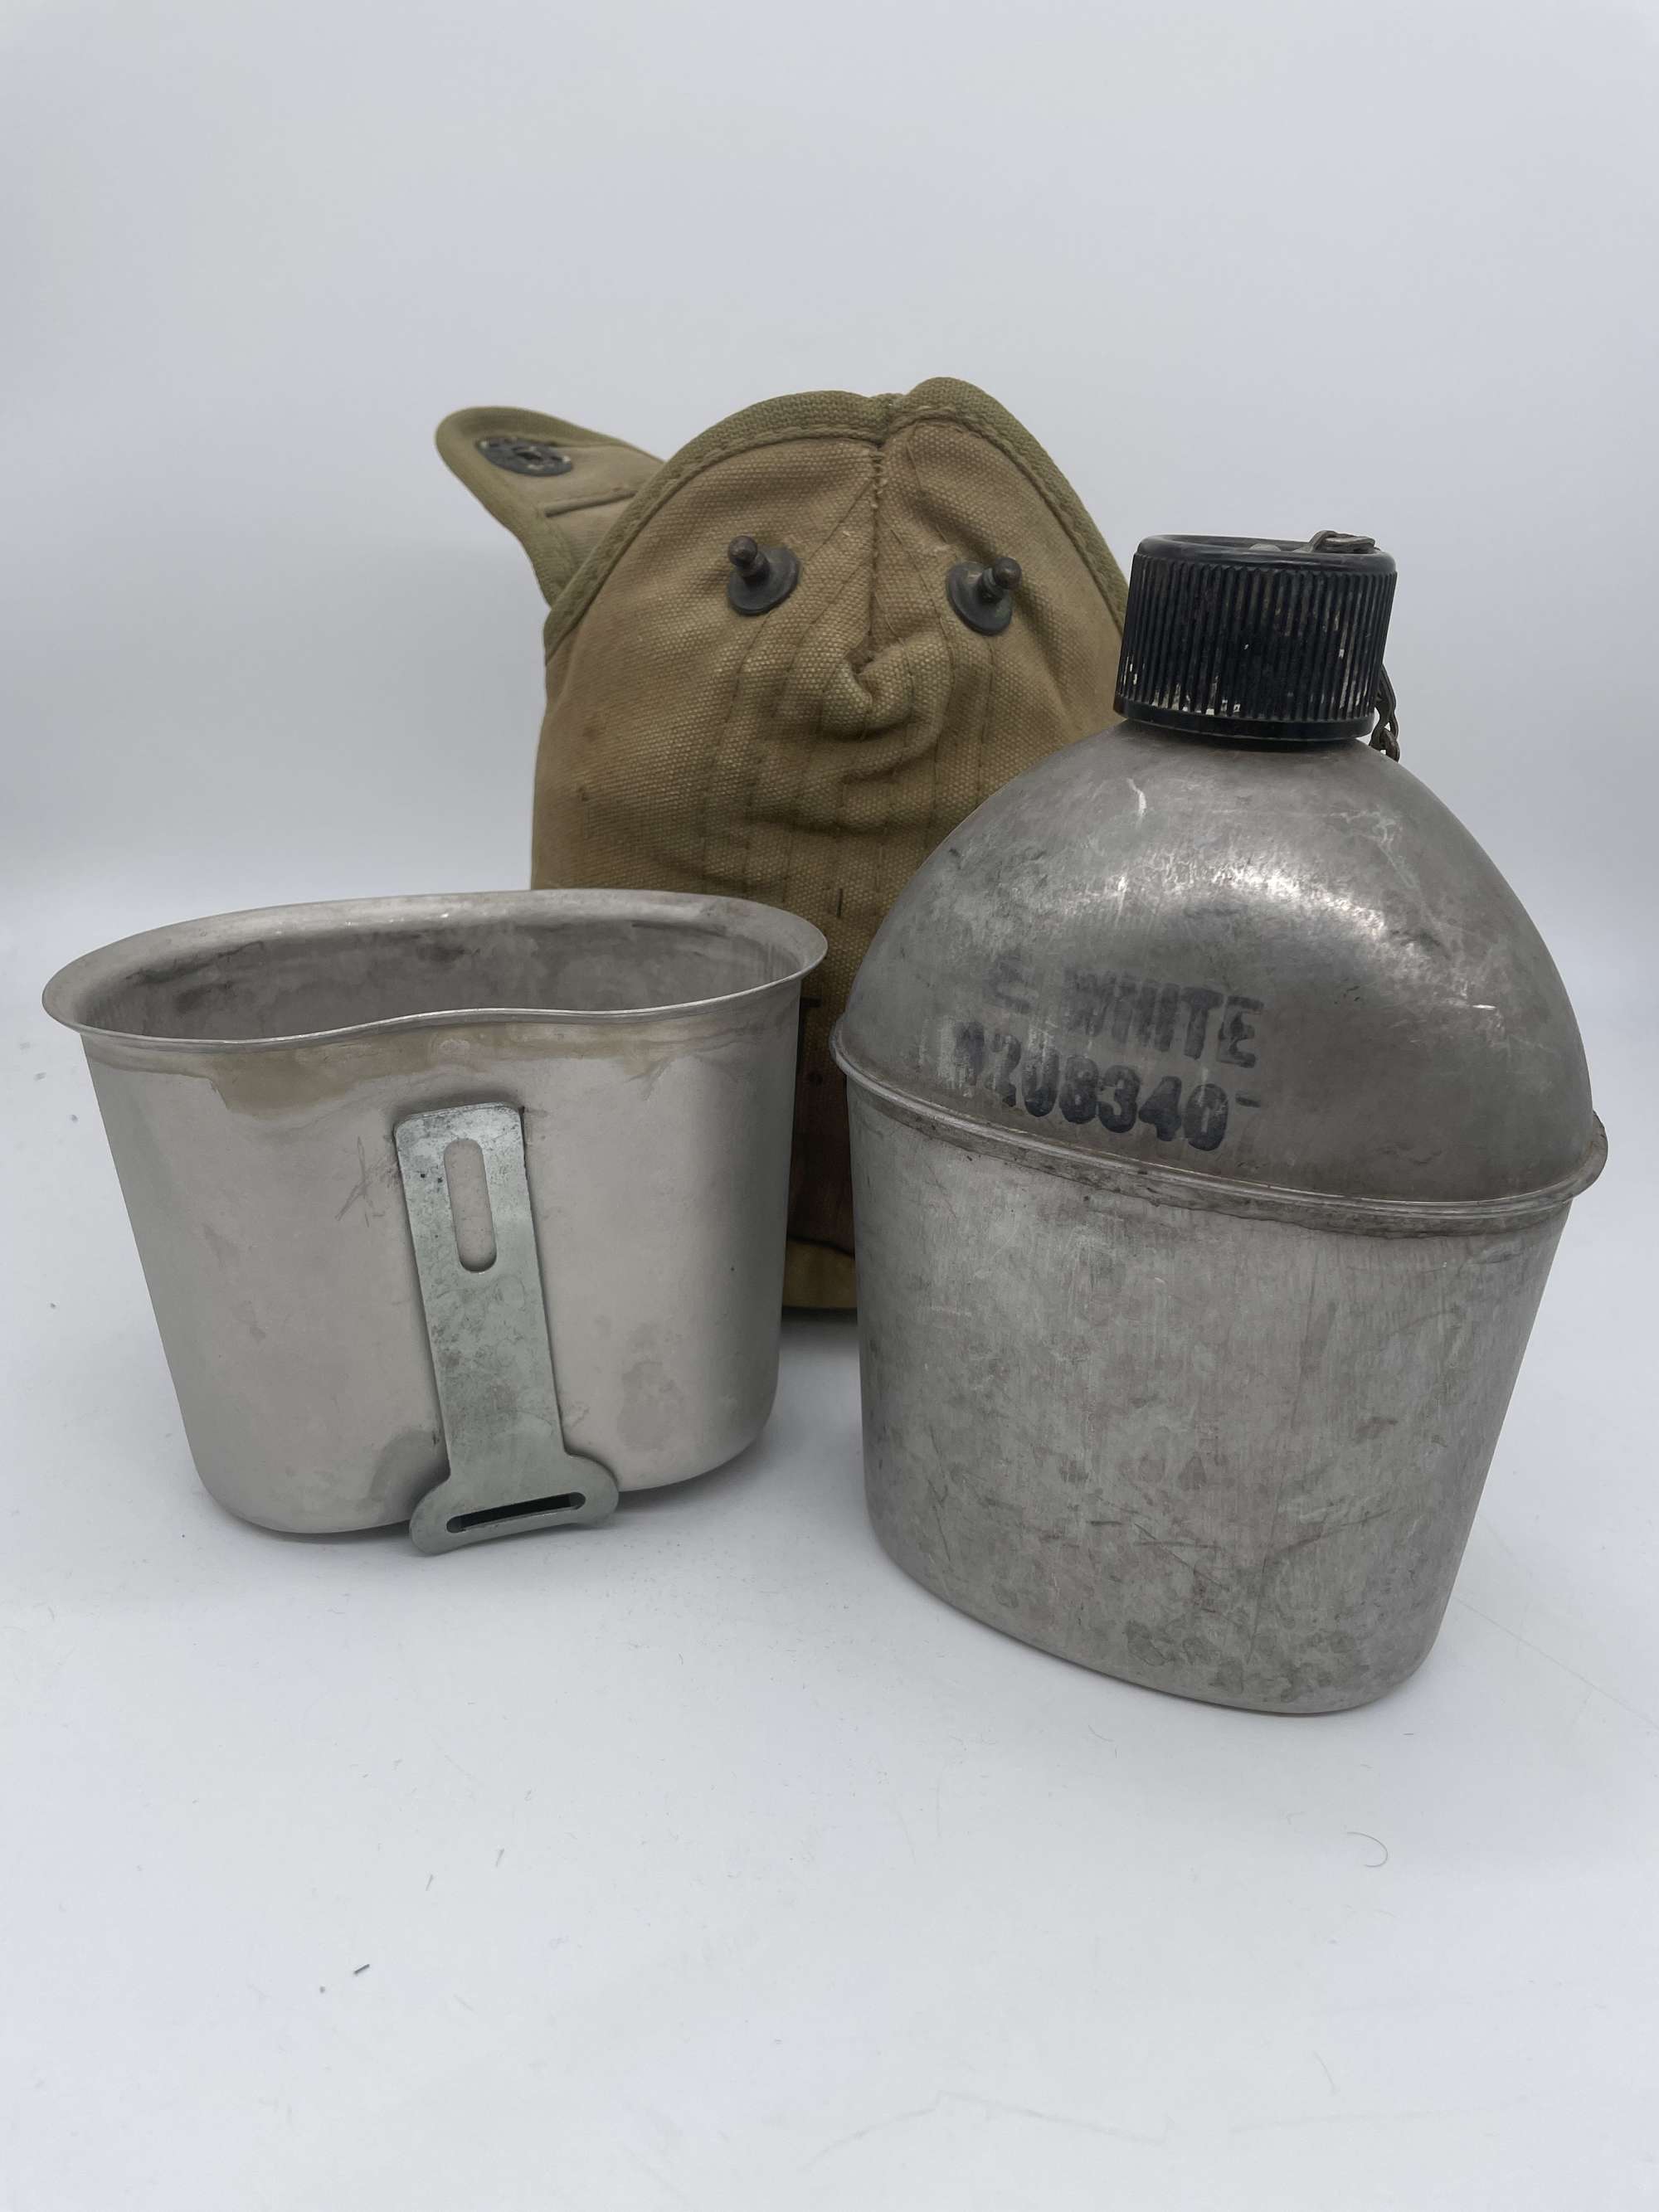 Named to a Casualty, Original WW2 American Canteen, Cup and Cover, 104th Infantry Div.